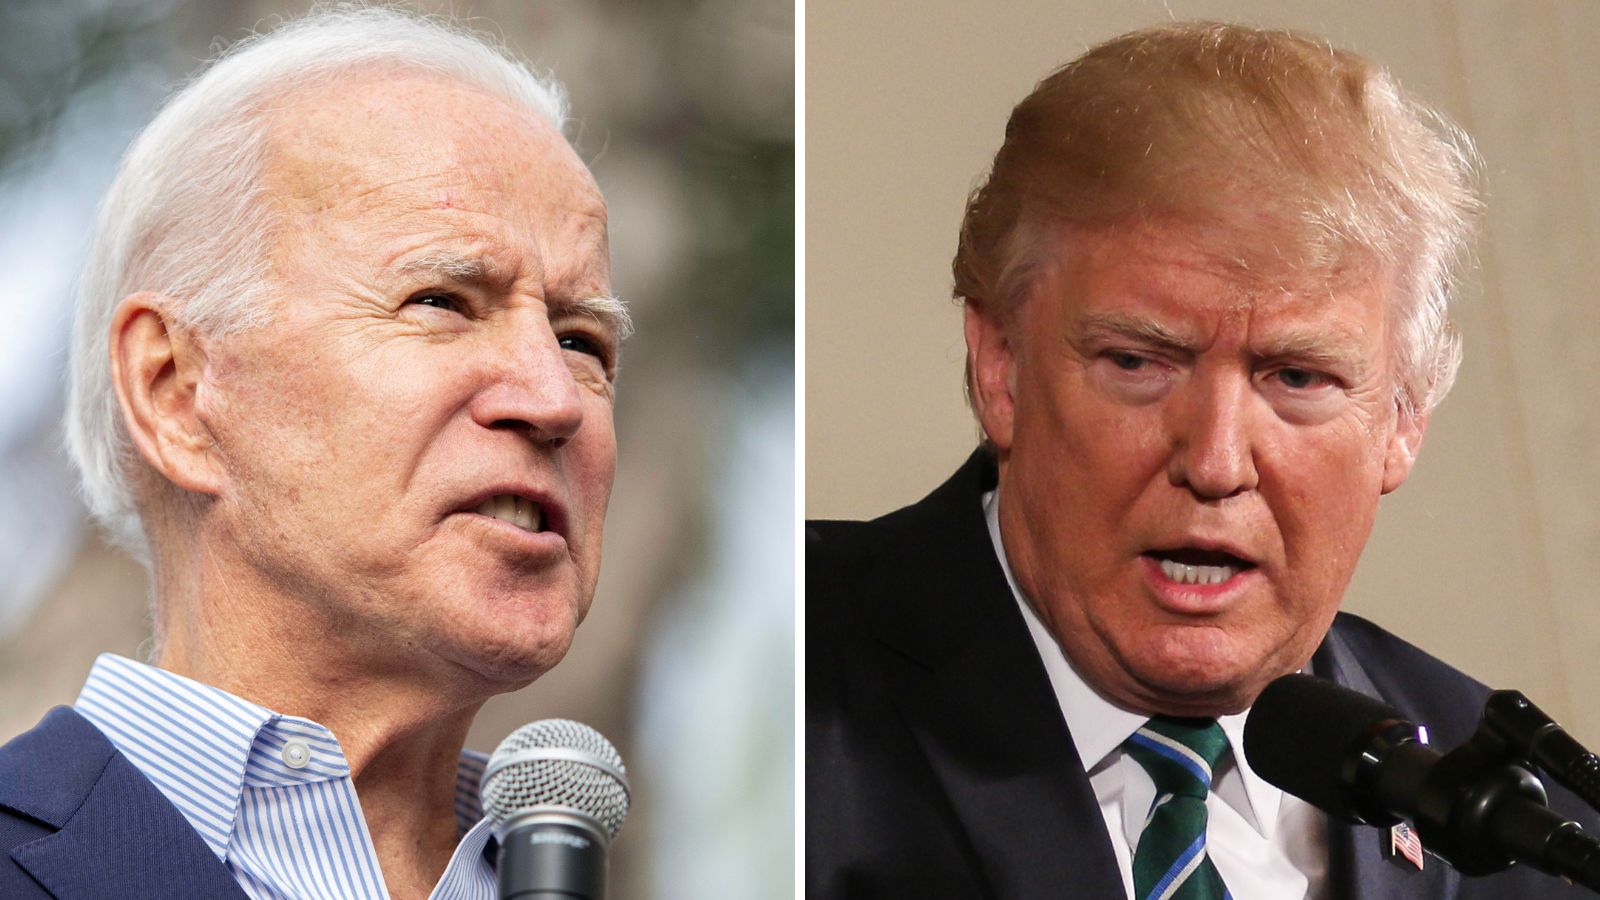 “The Next American President Will Expire Before His Term Does”: It’s Time to Face the Fact That Biden and Trump Are Far Too Old